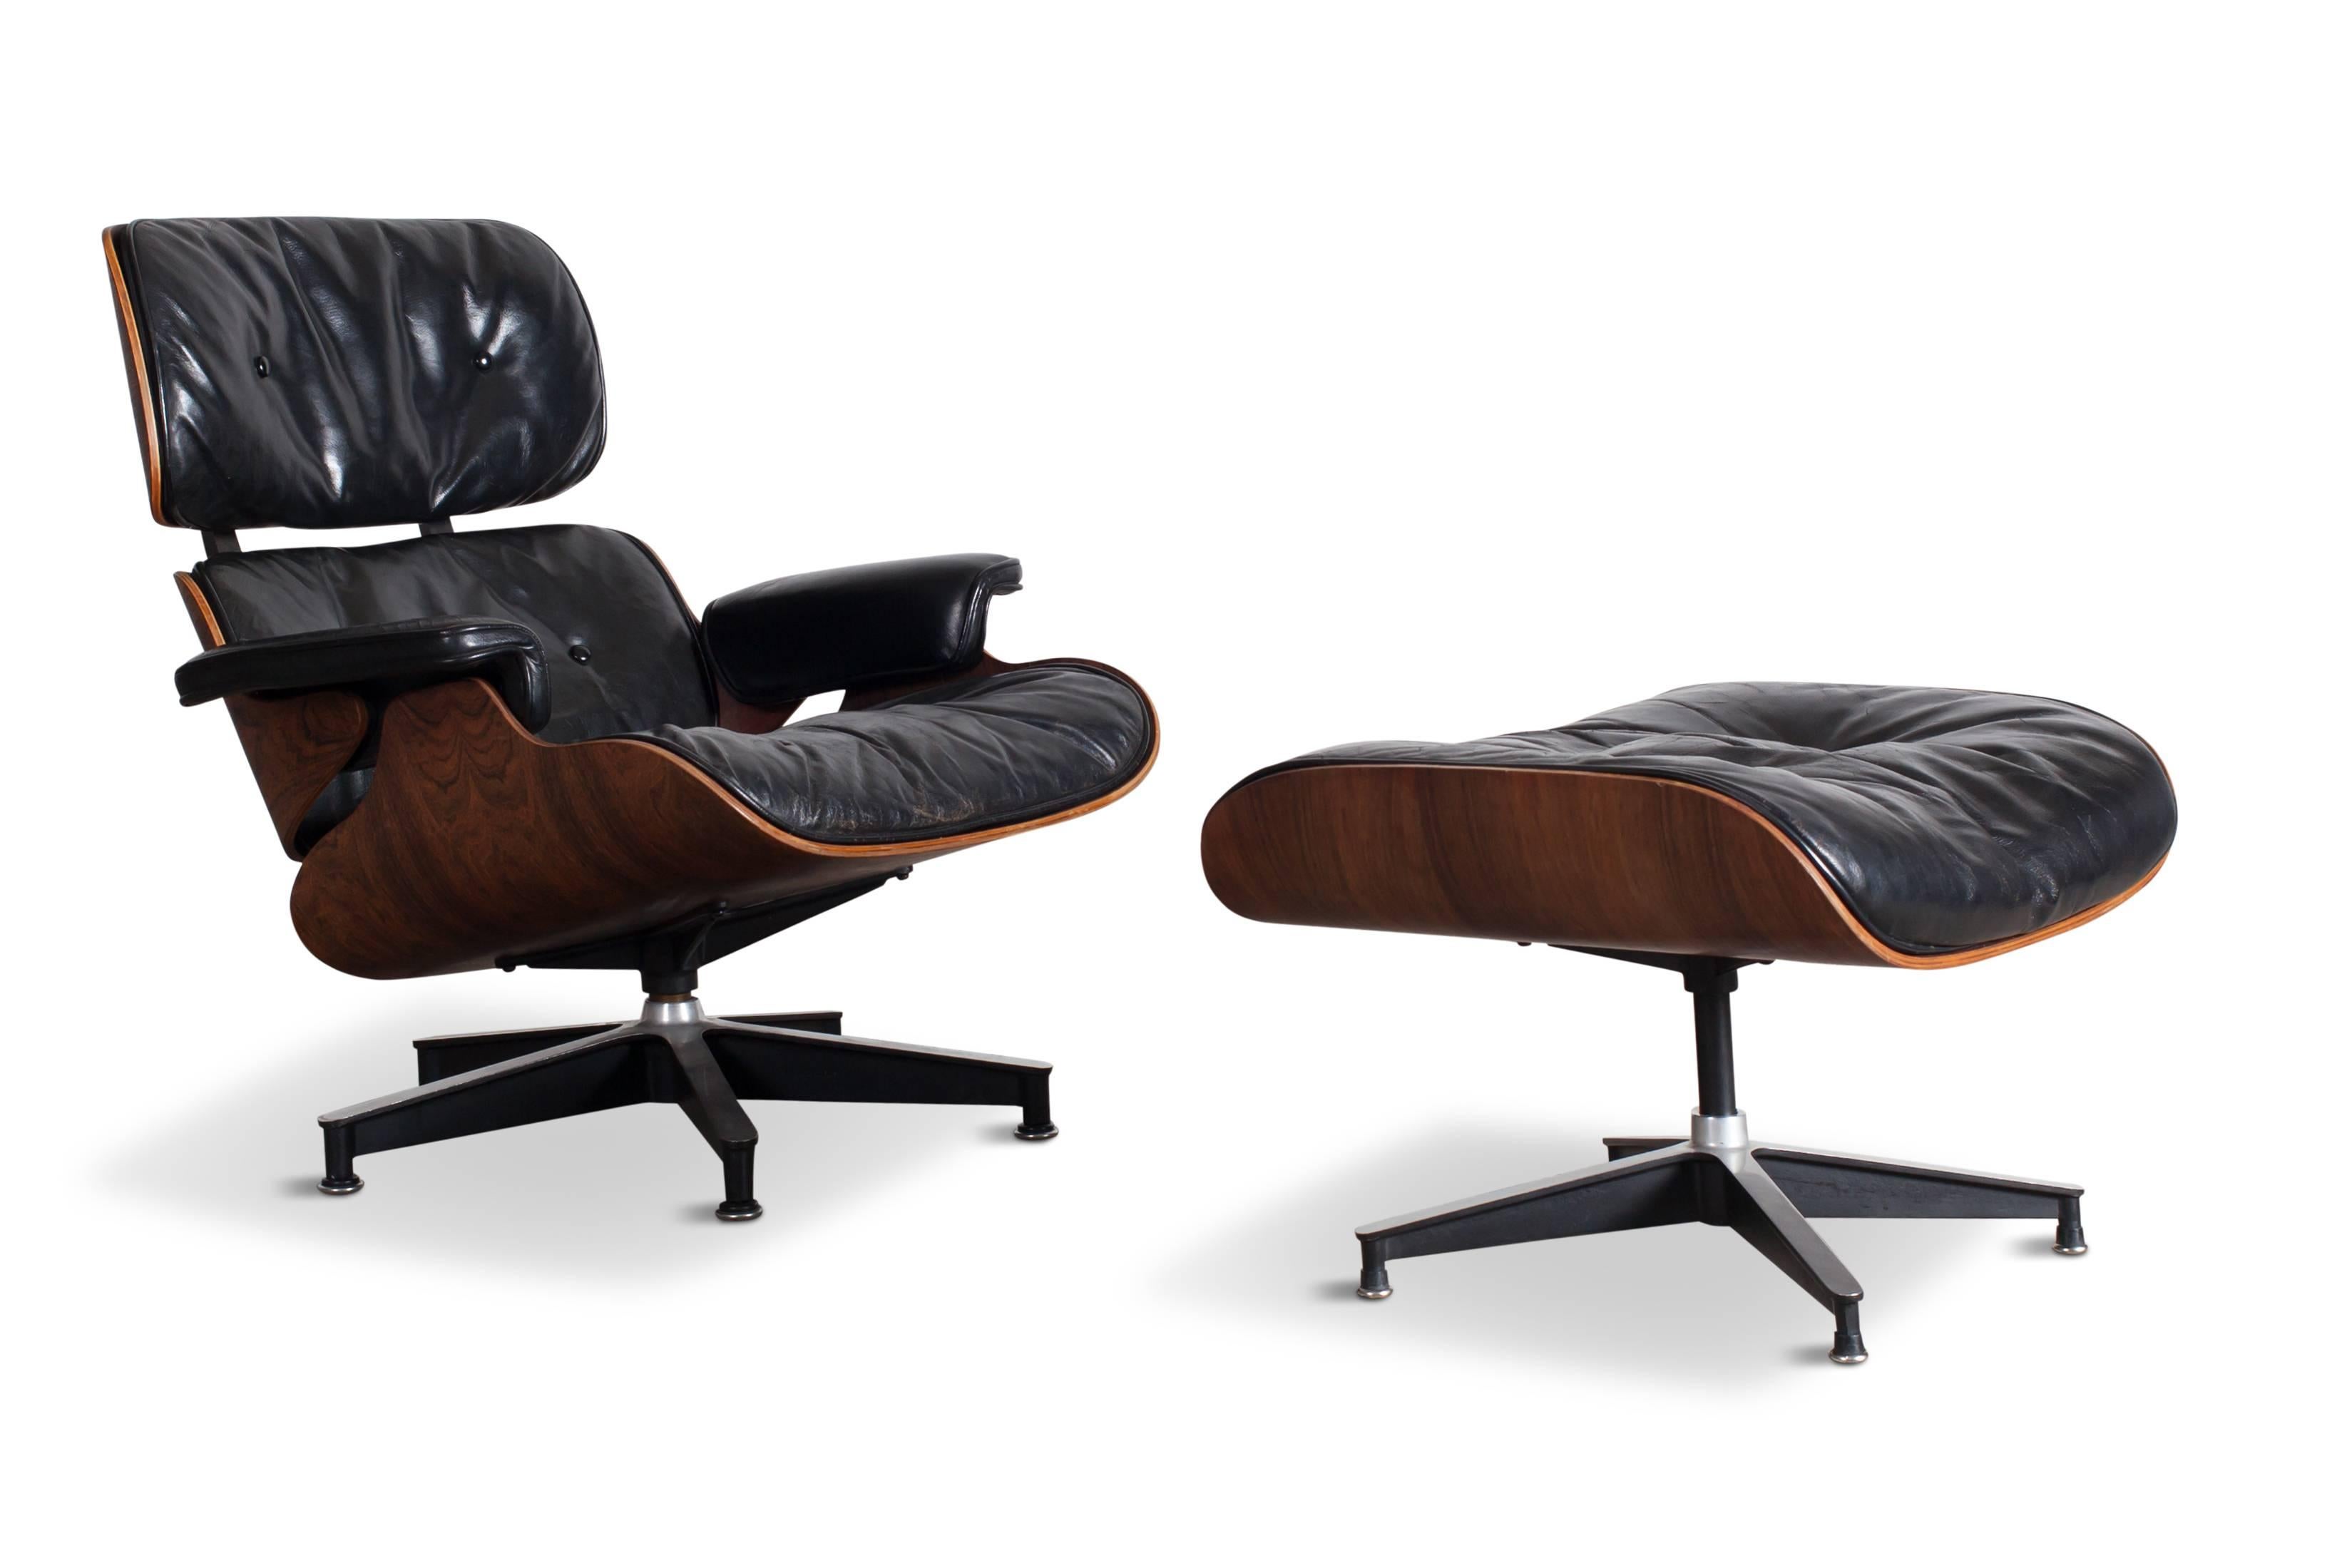 Rio Rosewood and black leather Charles & Ray Eames Lounge Chair, 1956 - 1st Edition.
The Holy grail of this icon and a true collector's piece.

As Charles and Ray Eames designed the famous Lounge Chair, they had the image of a
baseball glove in